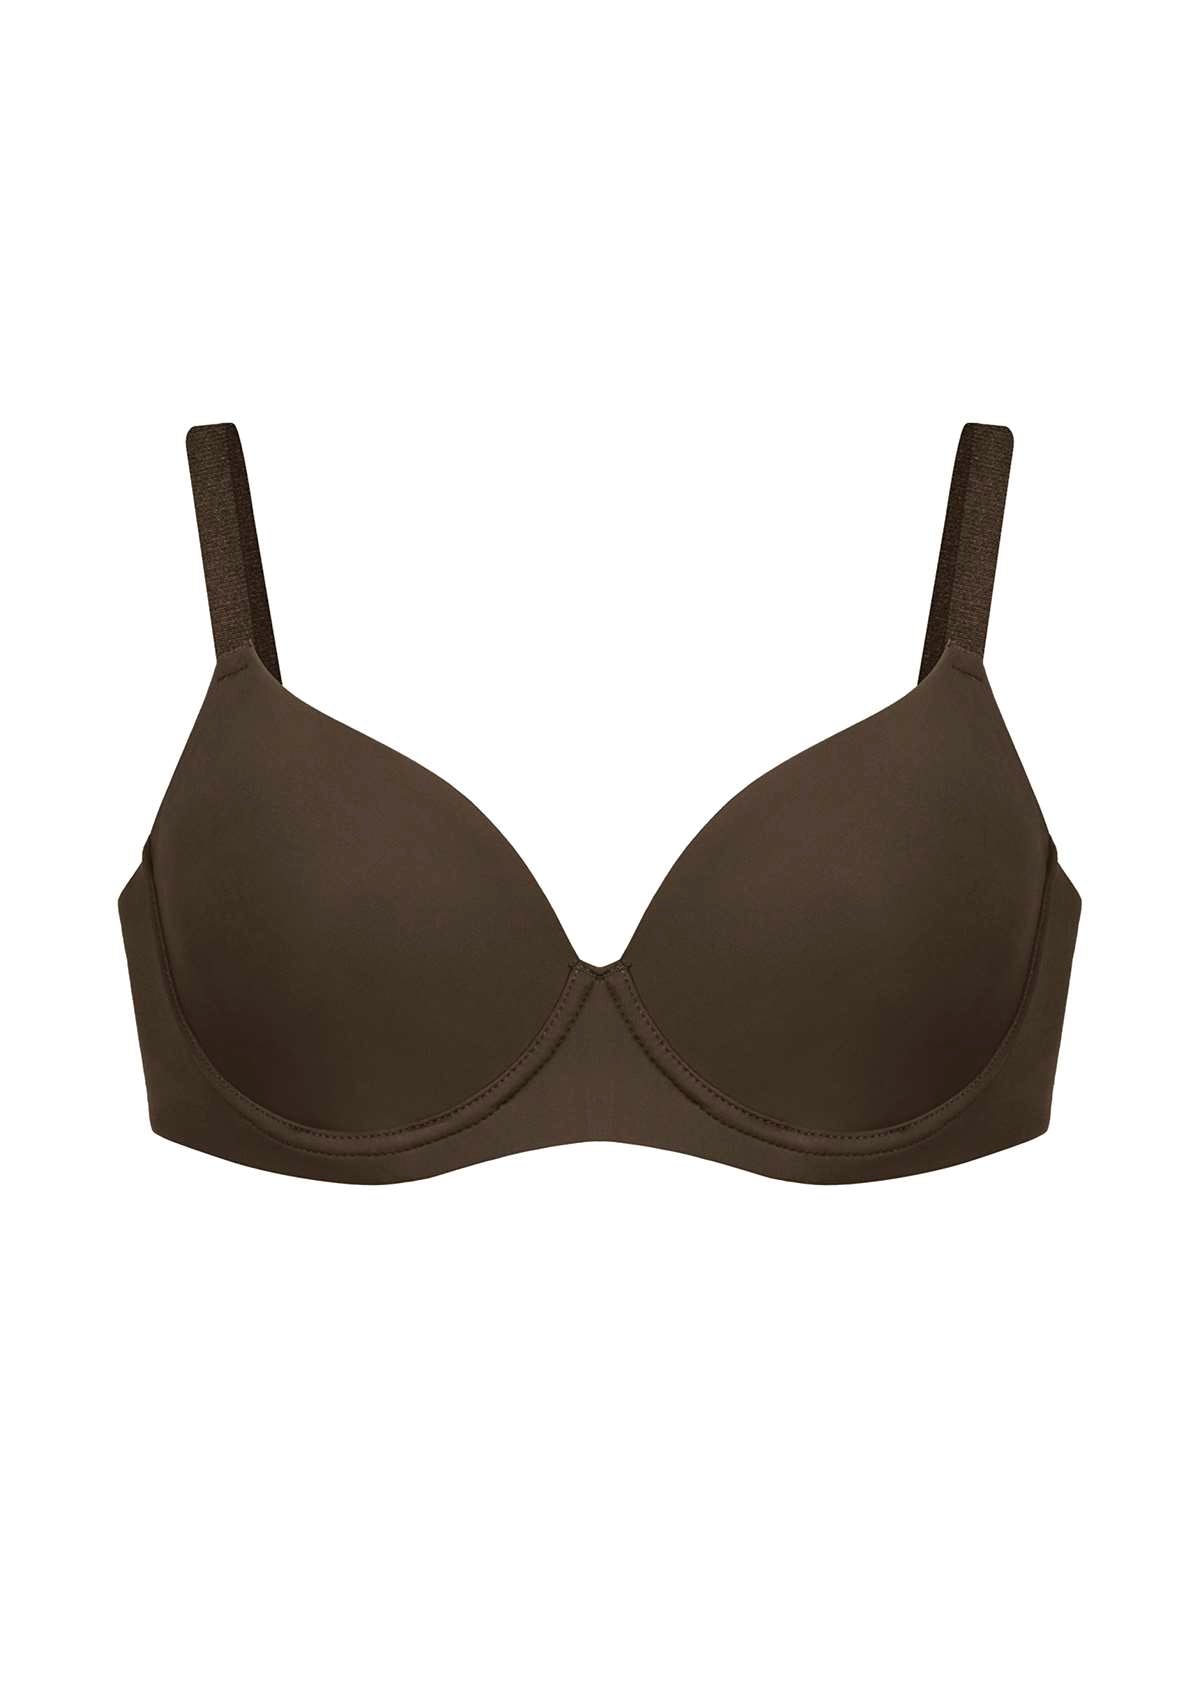 HSIA Gemma Smooth Supportive Padded T-shirt Bra - For Full Figures - Cocoa Brown / 34 / DD/E